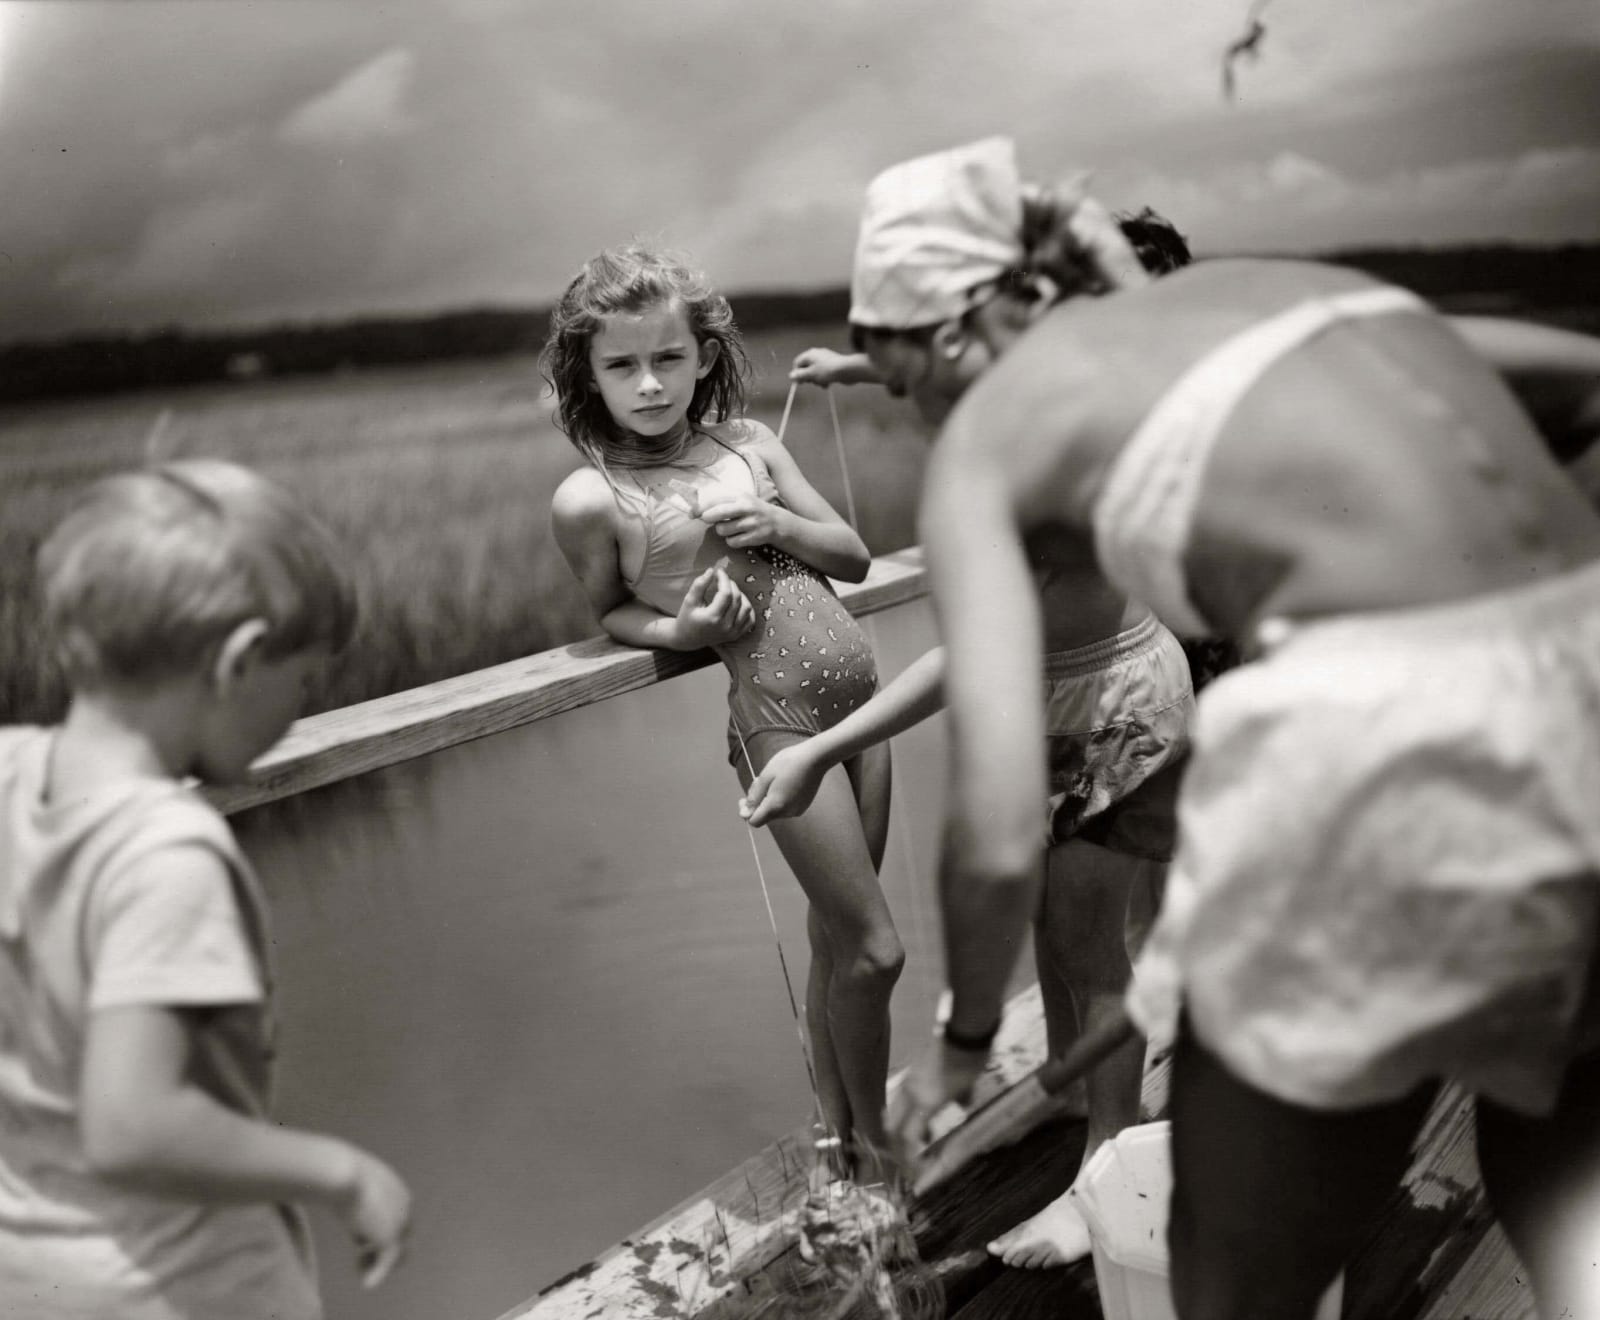 Virginia in bathing suit, crabbing at Pawley's, from the Immediate Family series by Sally Mann